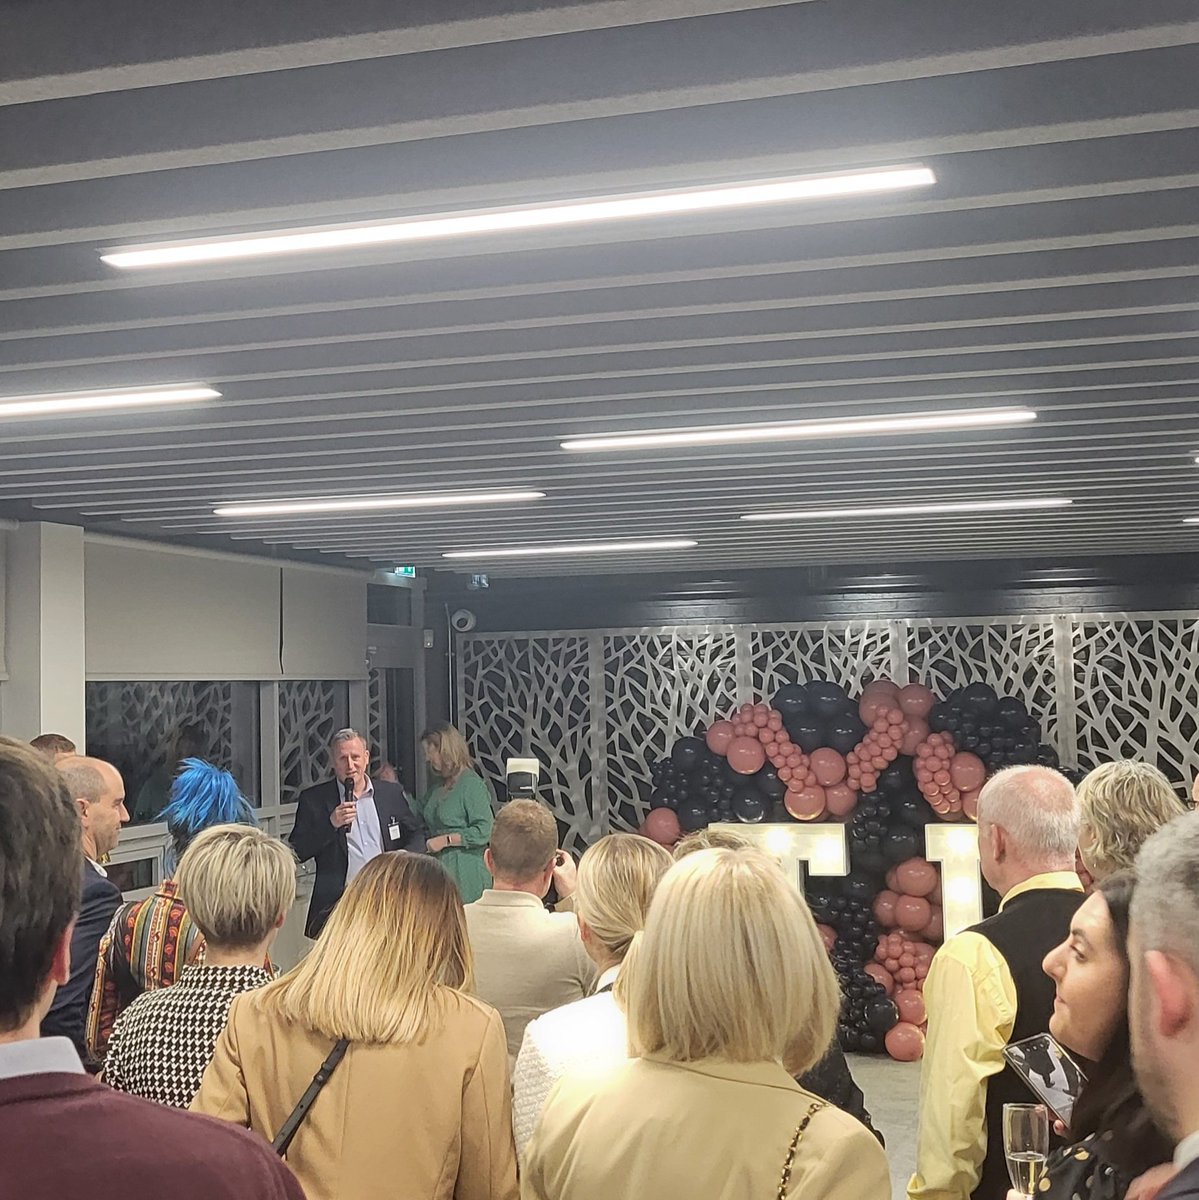 Great to see the new @TaylorEmmet HQ this evening representing @sheffchamber. A long standing Sheffield organisation with now a beautiful new home! #sheffieldisuper